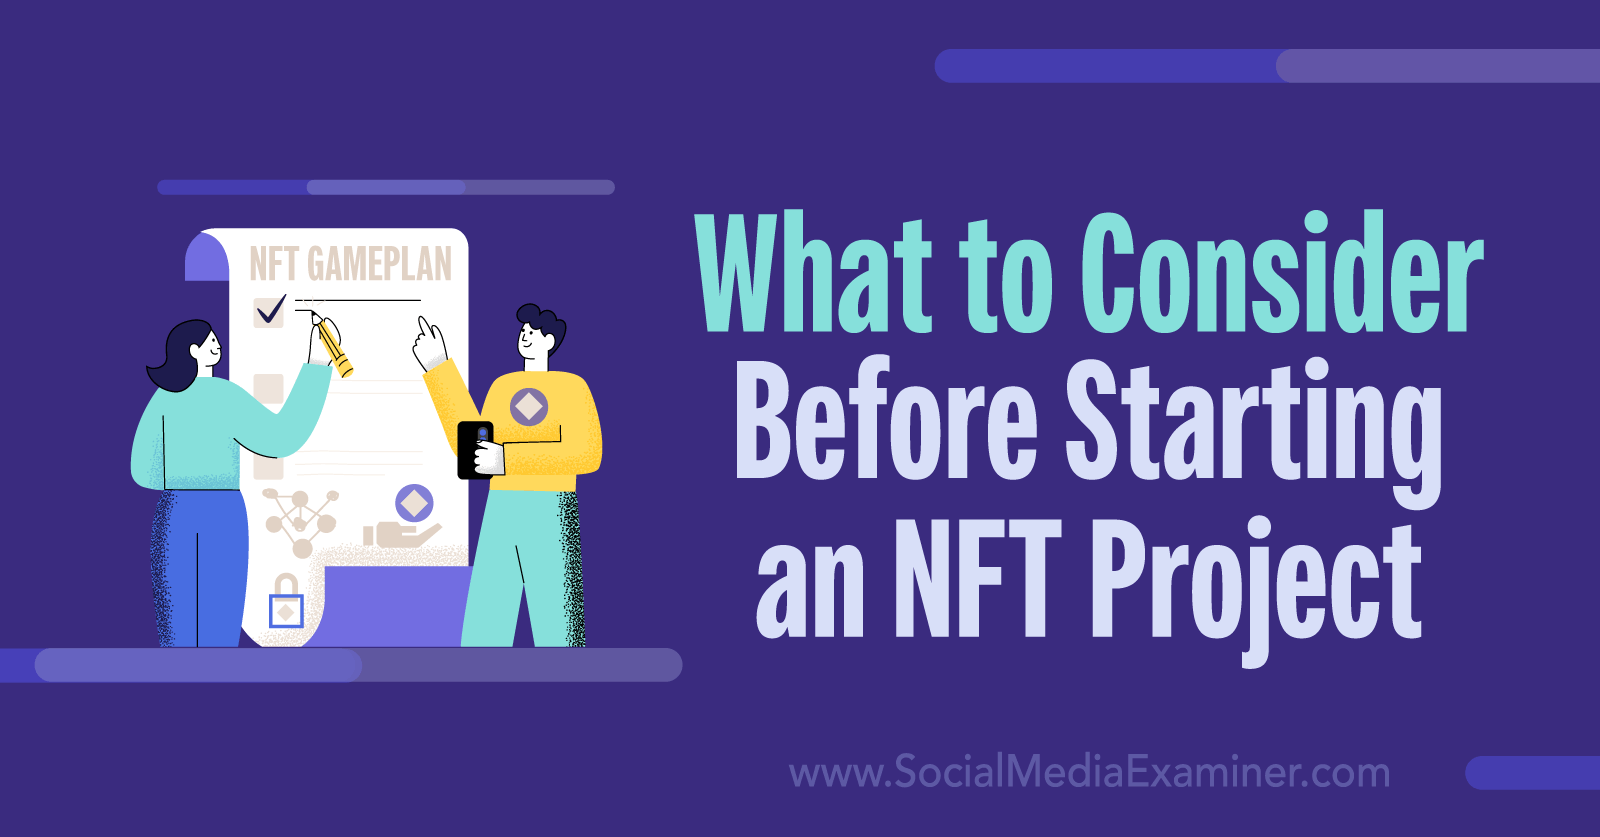 what-to-consier-before-starting-an-nft-project-social-media-examiner